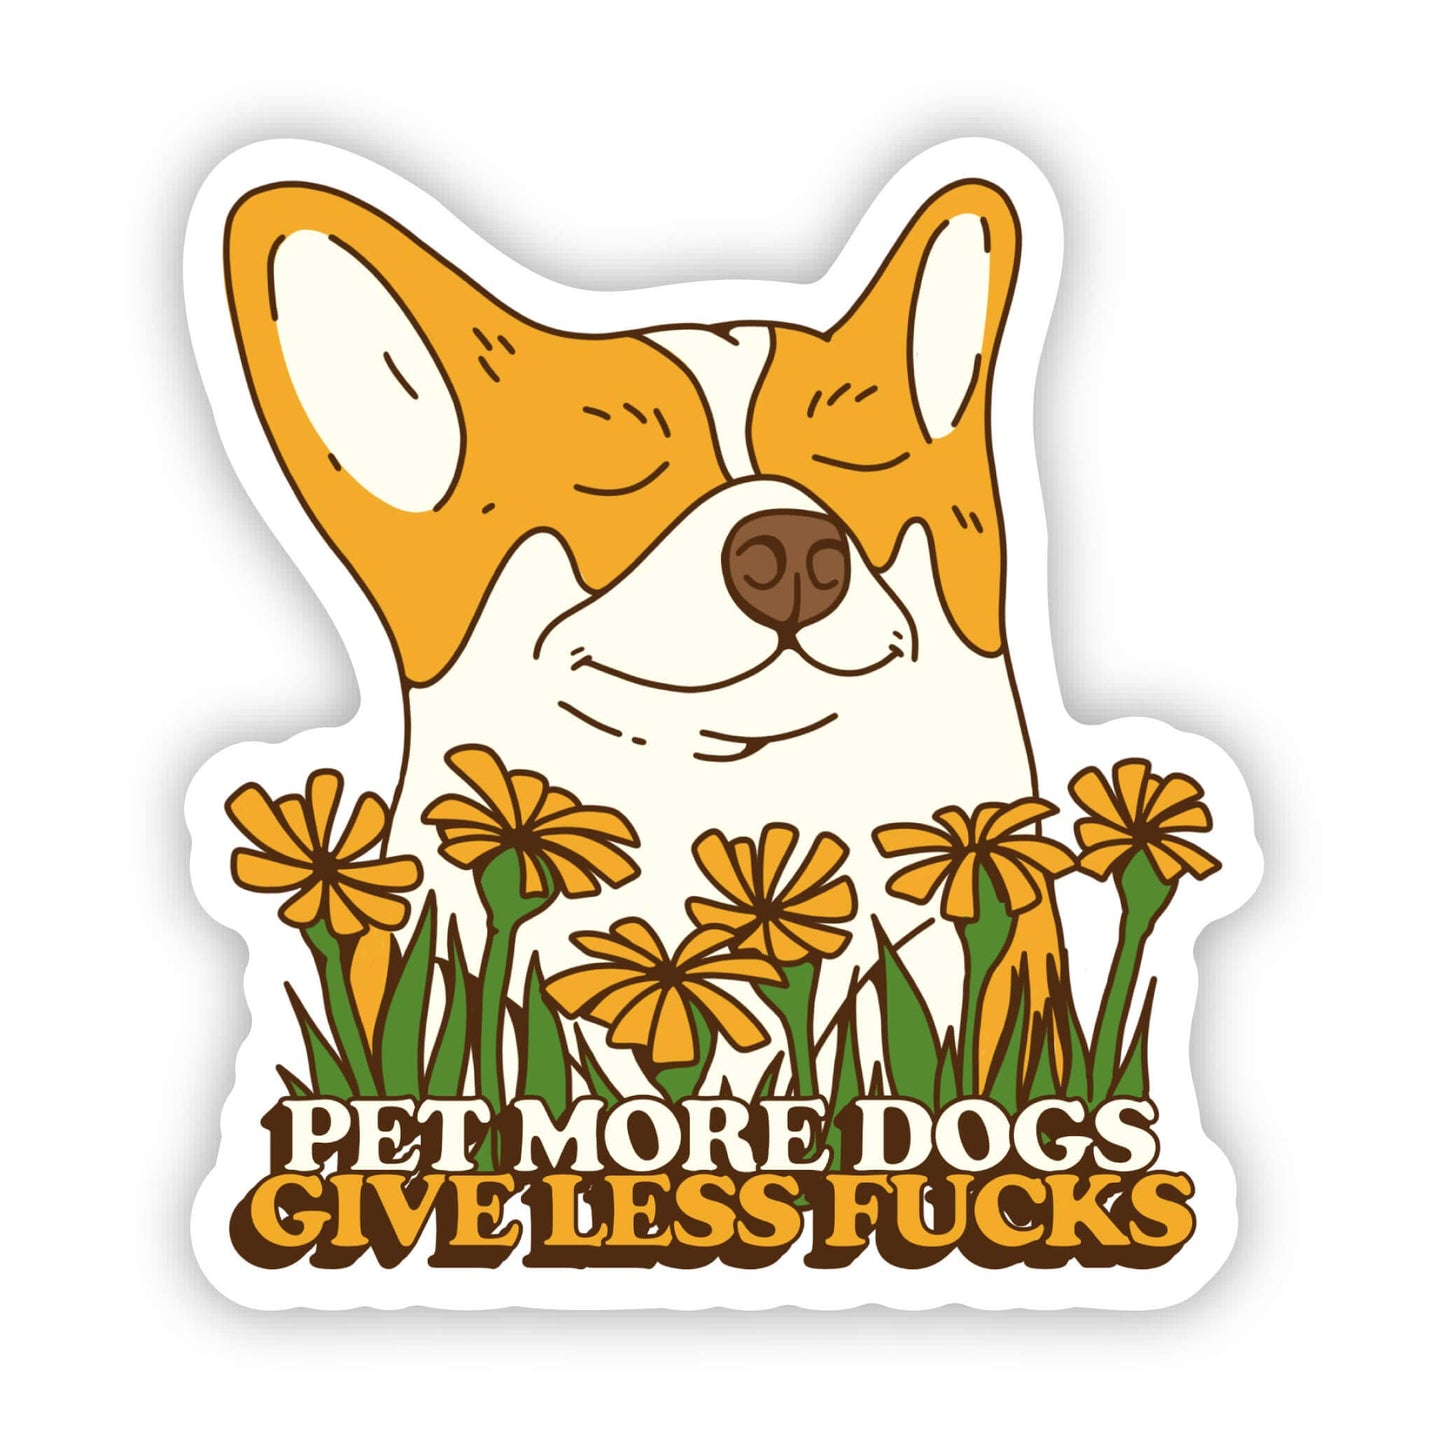 Pet More Dogs. Give Less Fu**s Sticker